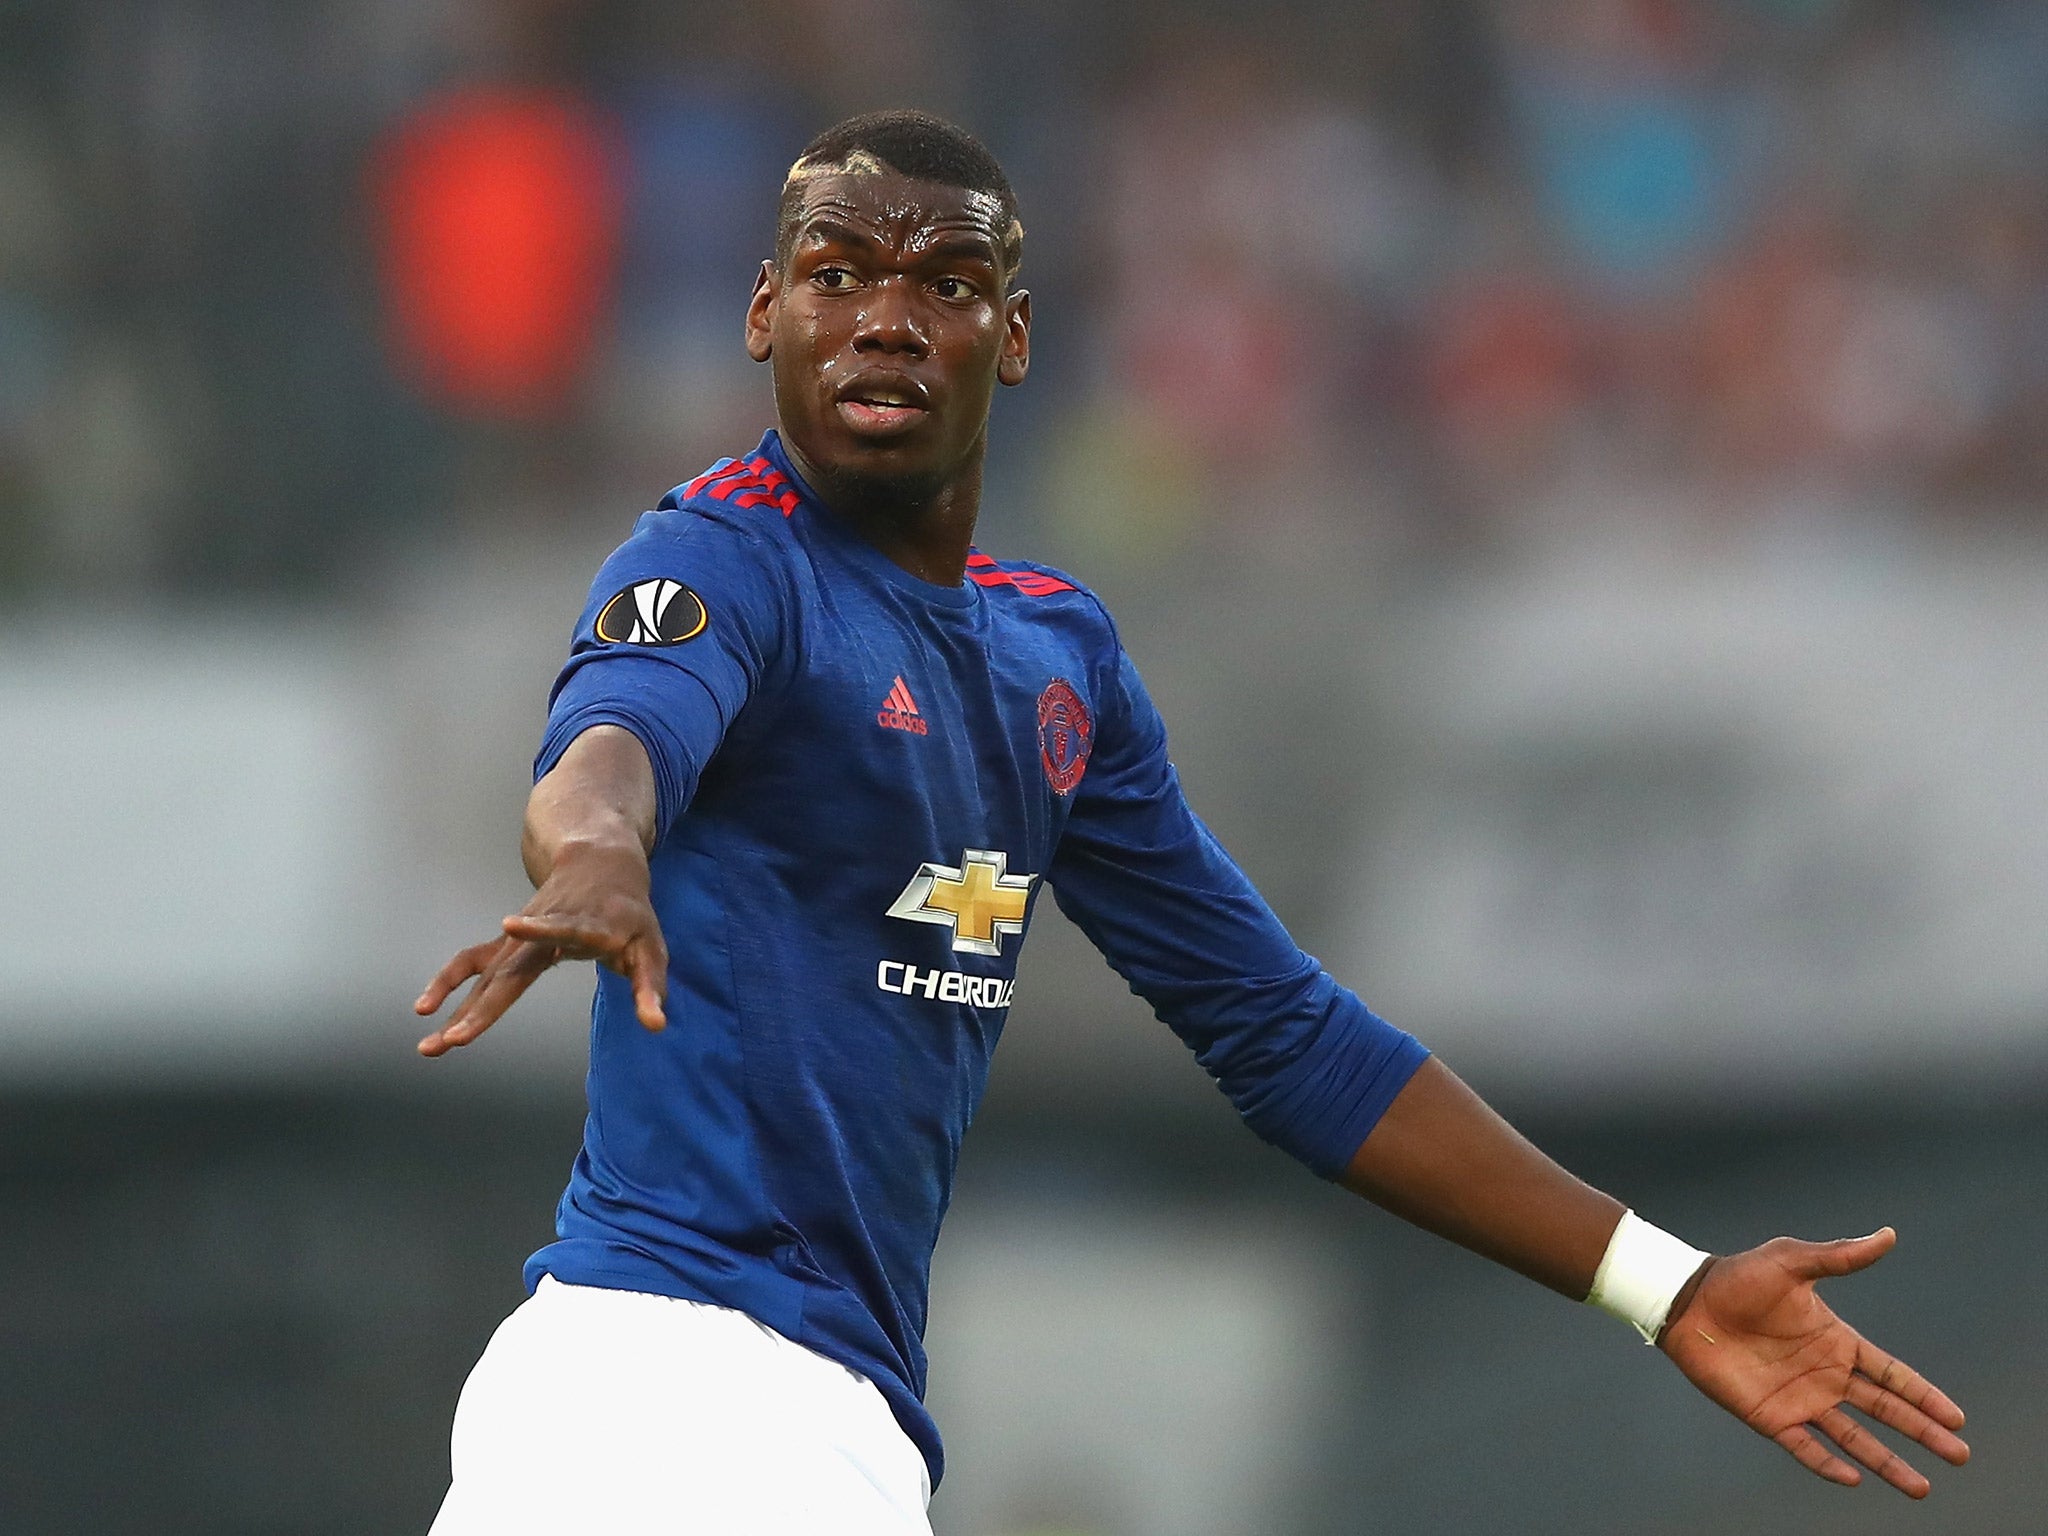 Paul Pogba was criticised by Paul Scholes in the wake of Manchester United's 1-0 defeat by Feyenoord